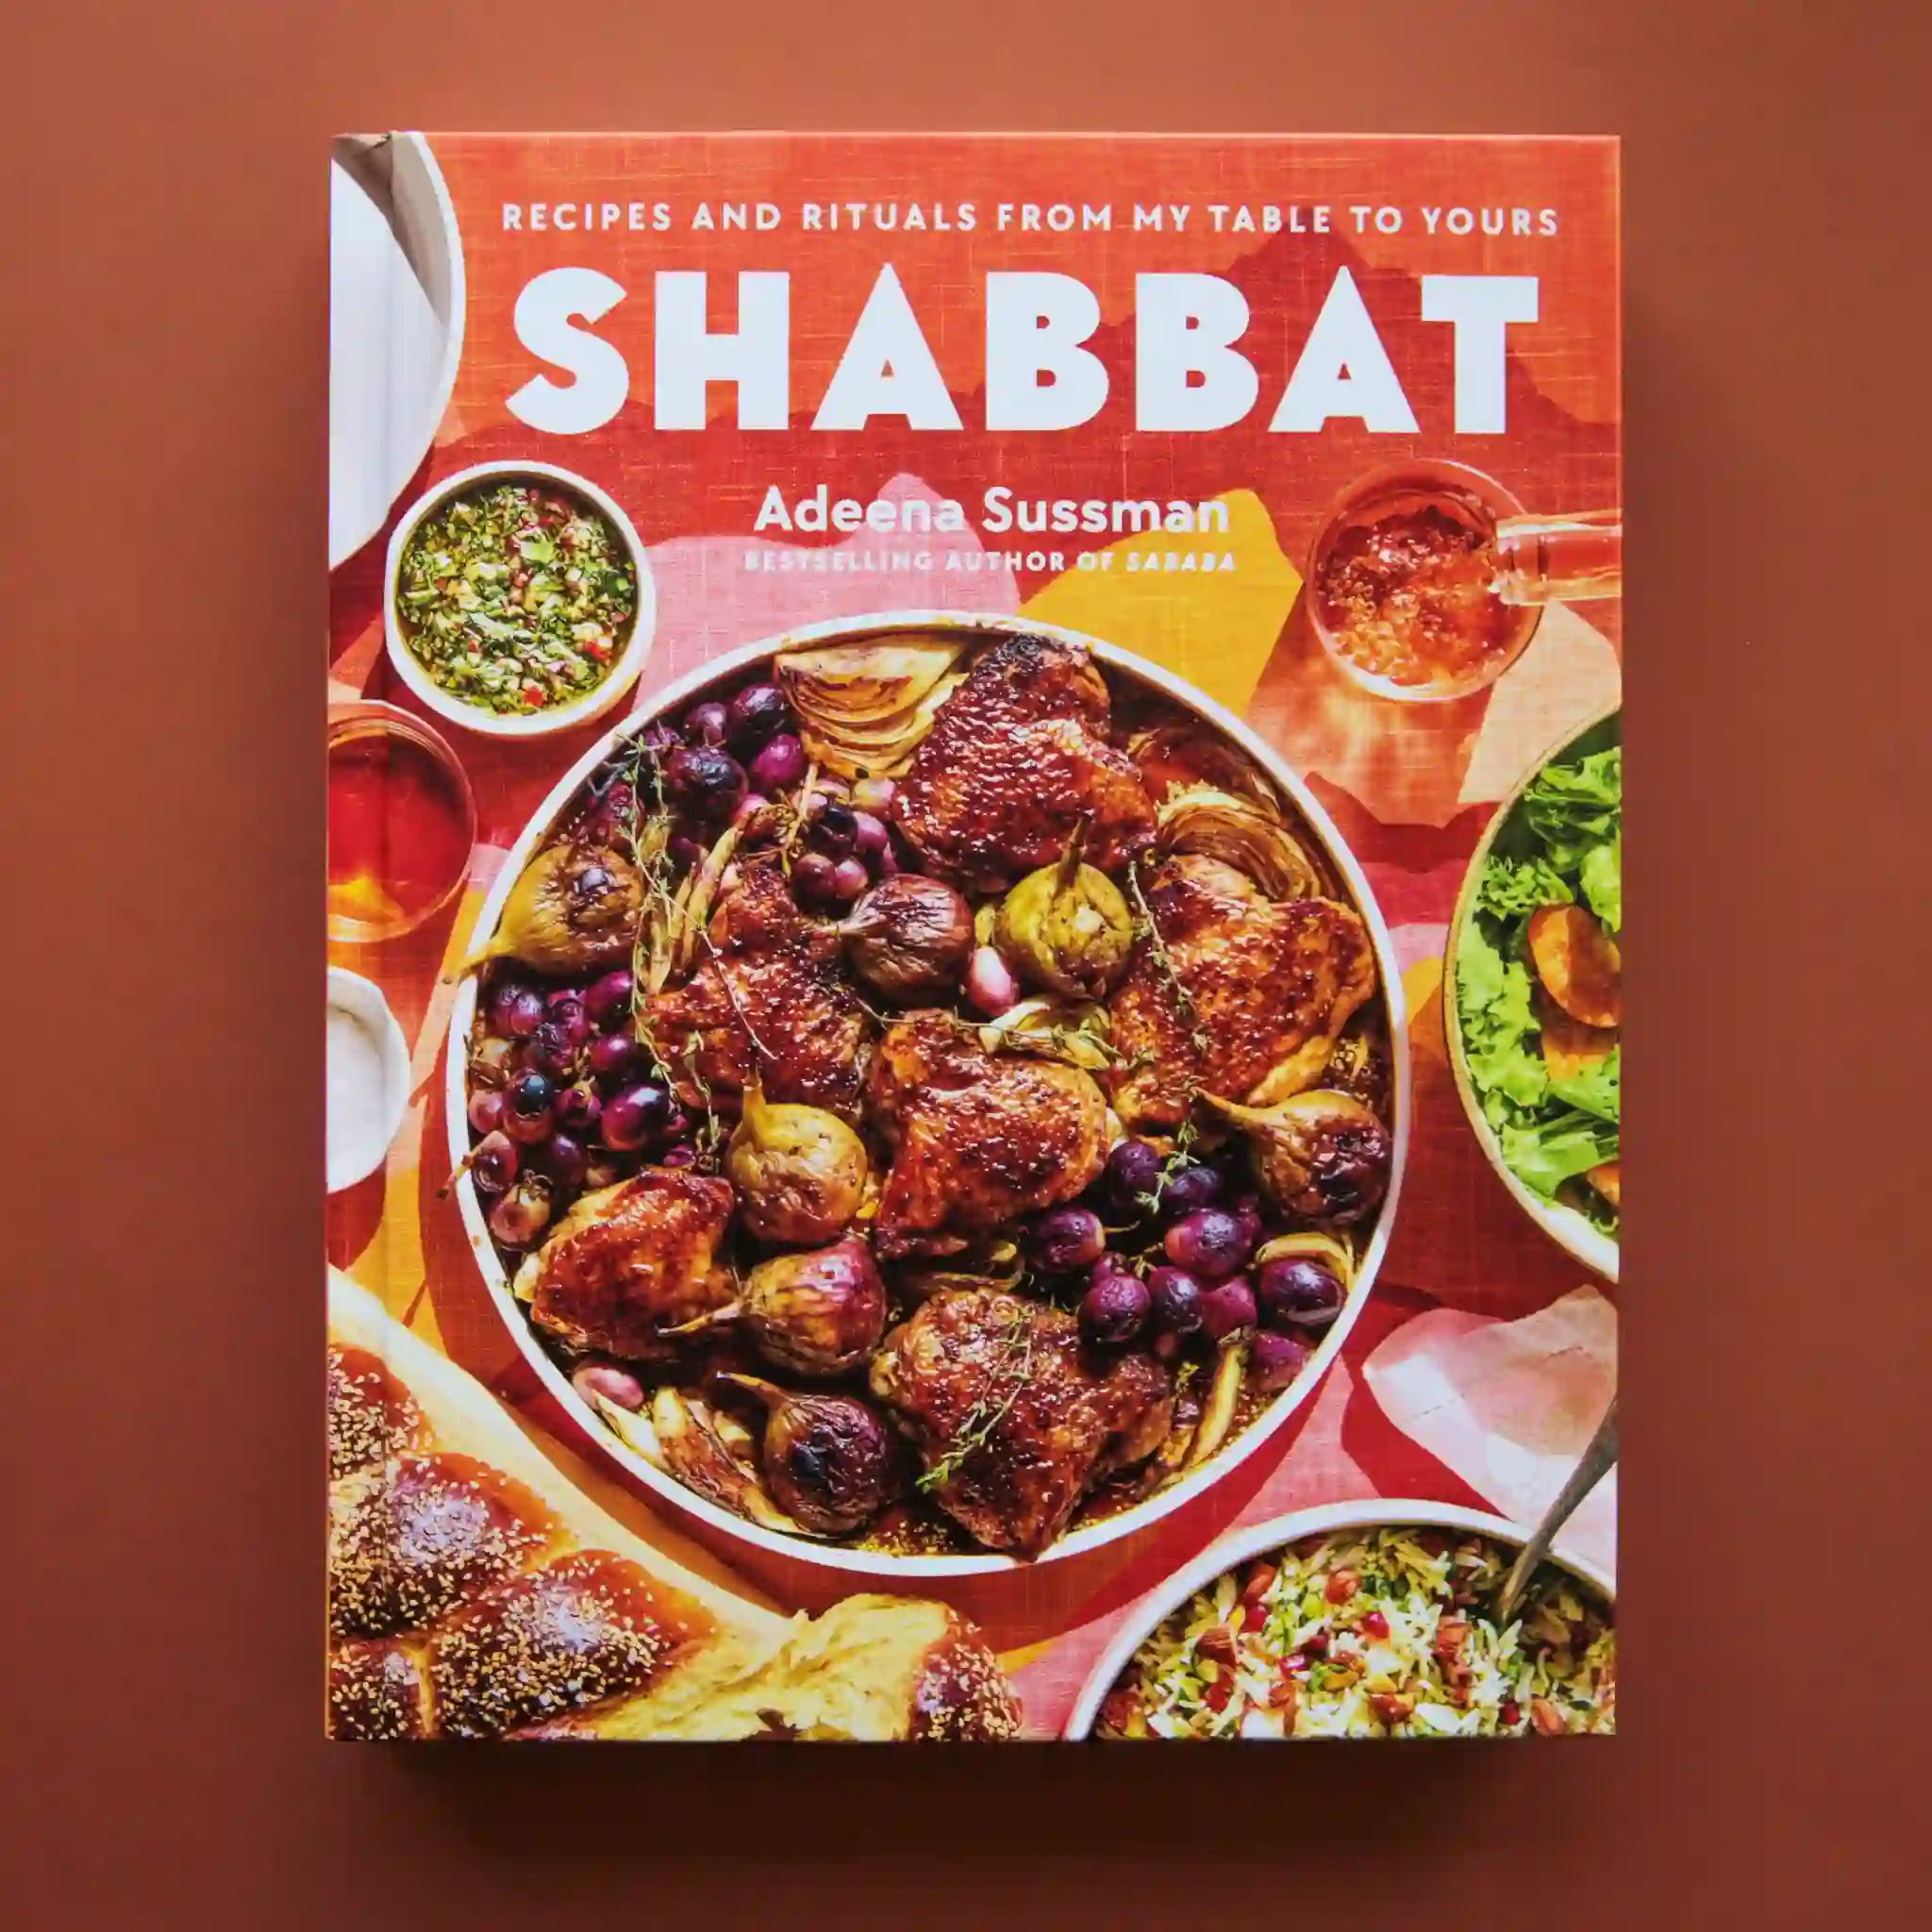 On a burnt orange background is a colorful book cover with a big family style meal with white text at the top that reads, "Recipes and RItuals From My Table To Yours Shabbat".